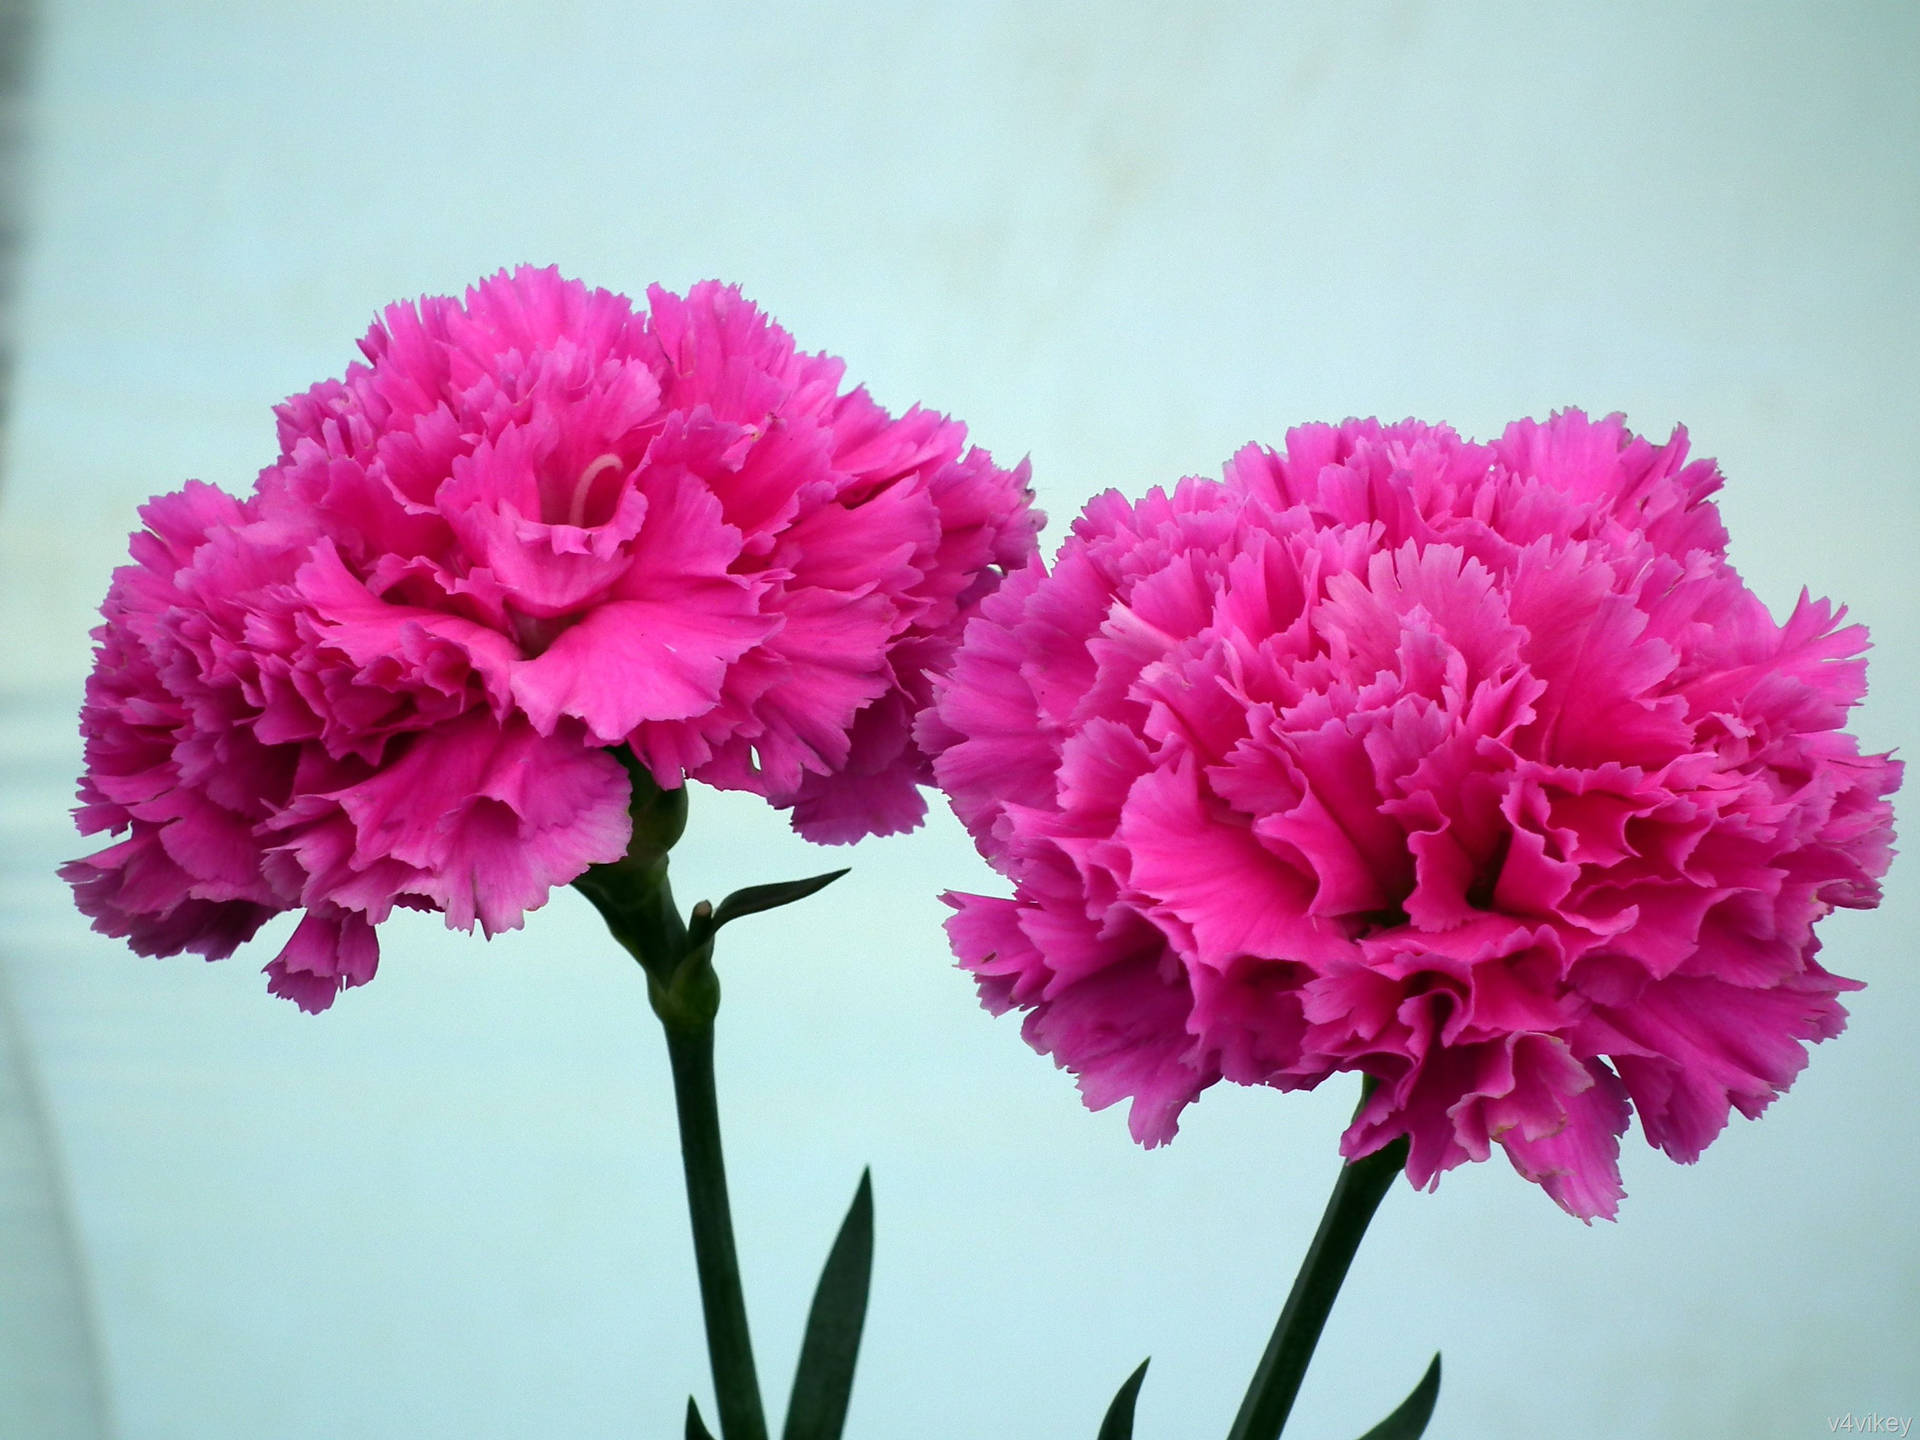 Caption: A Bouquet Of Vibrant Hot Pink Carnations Background